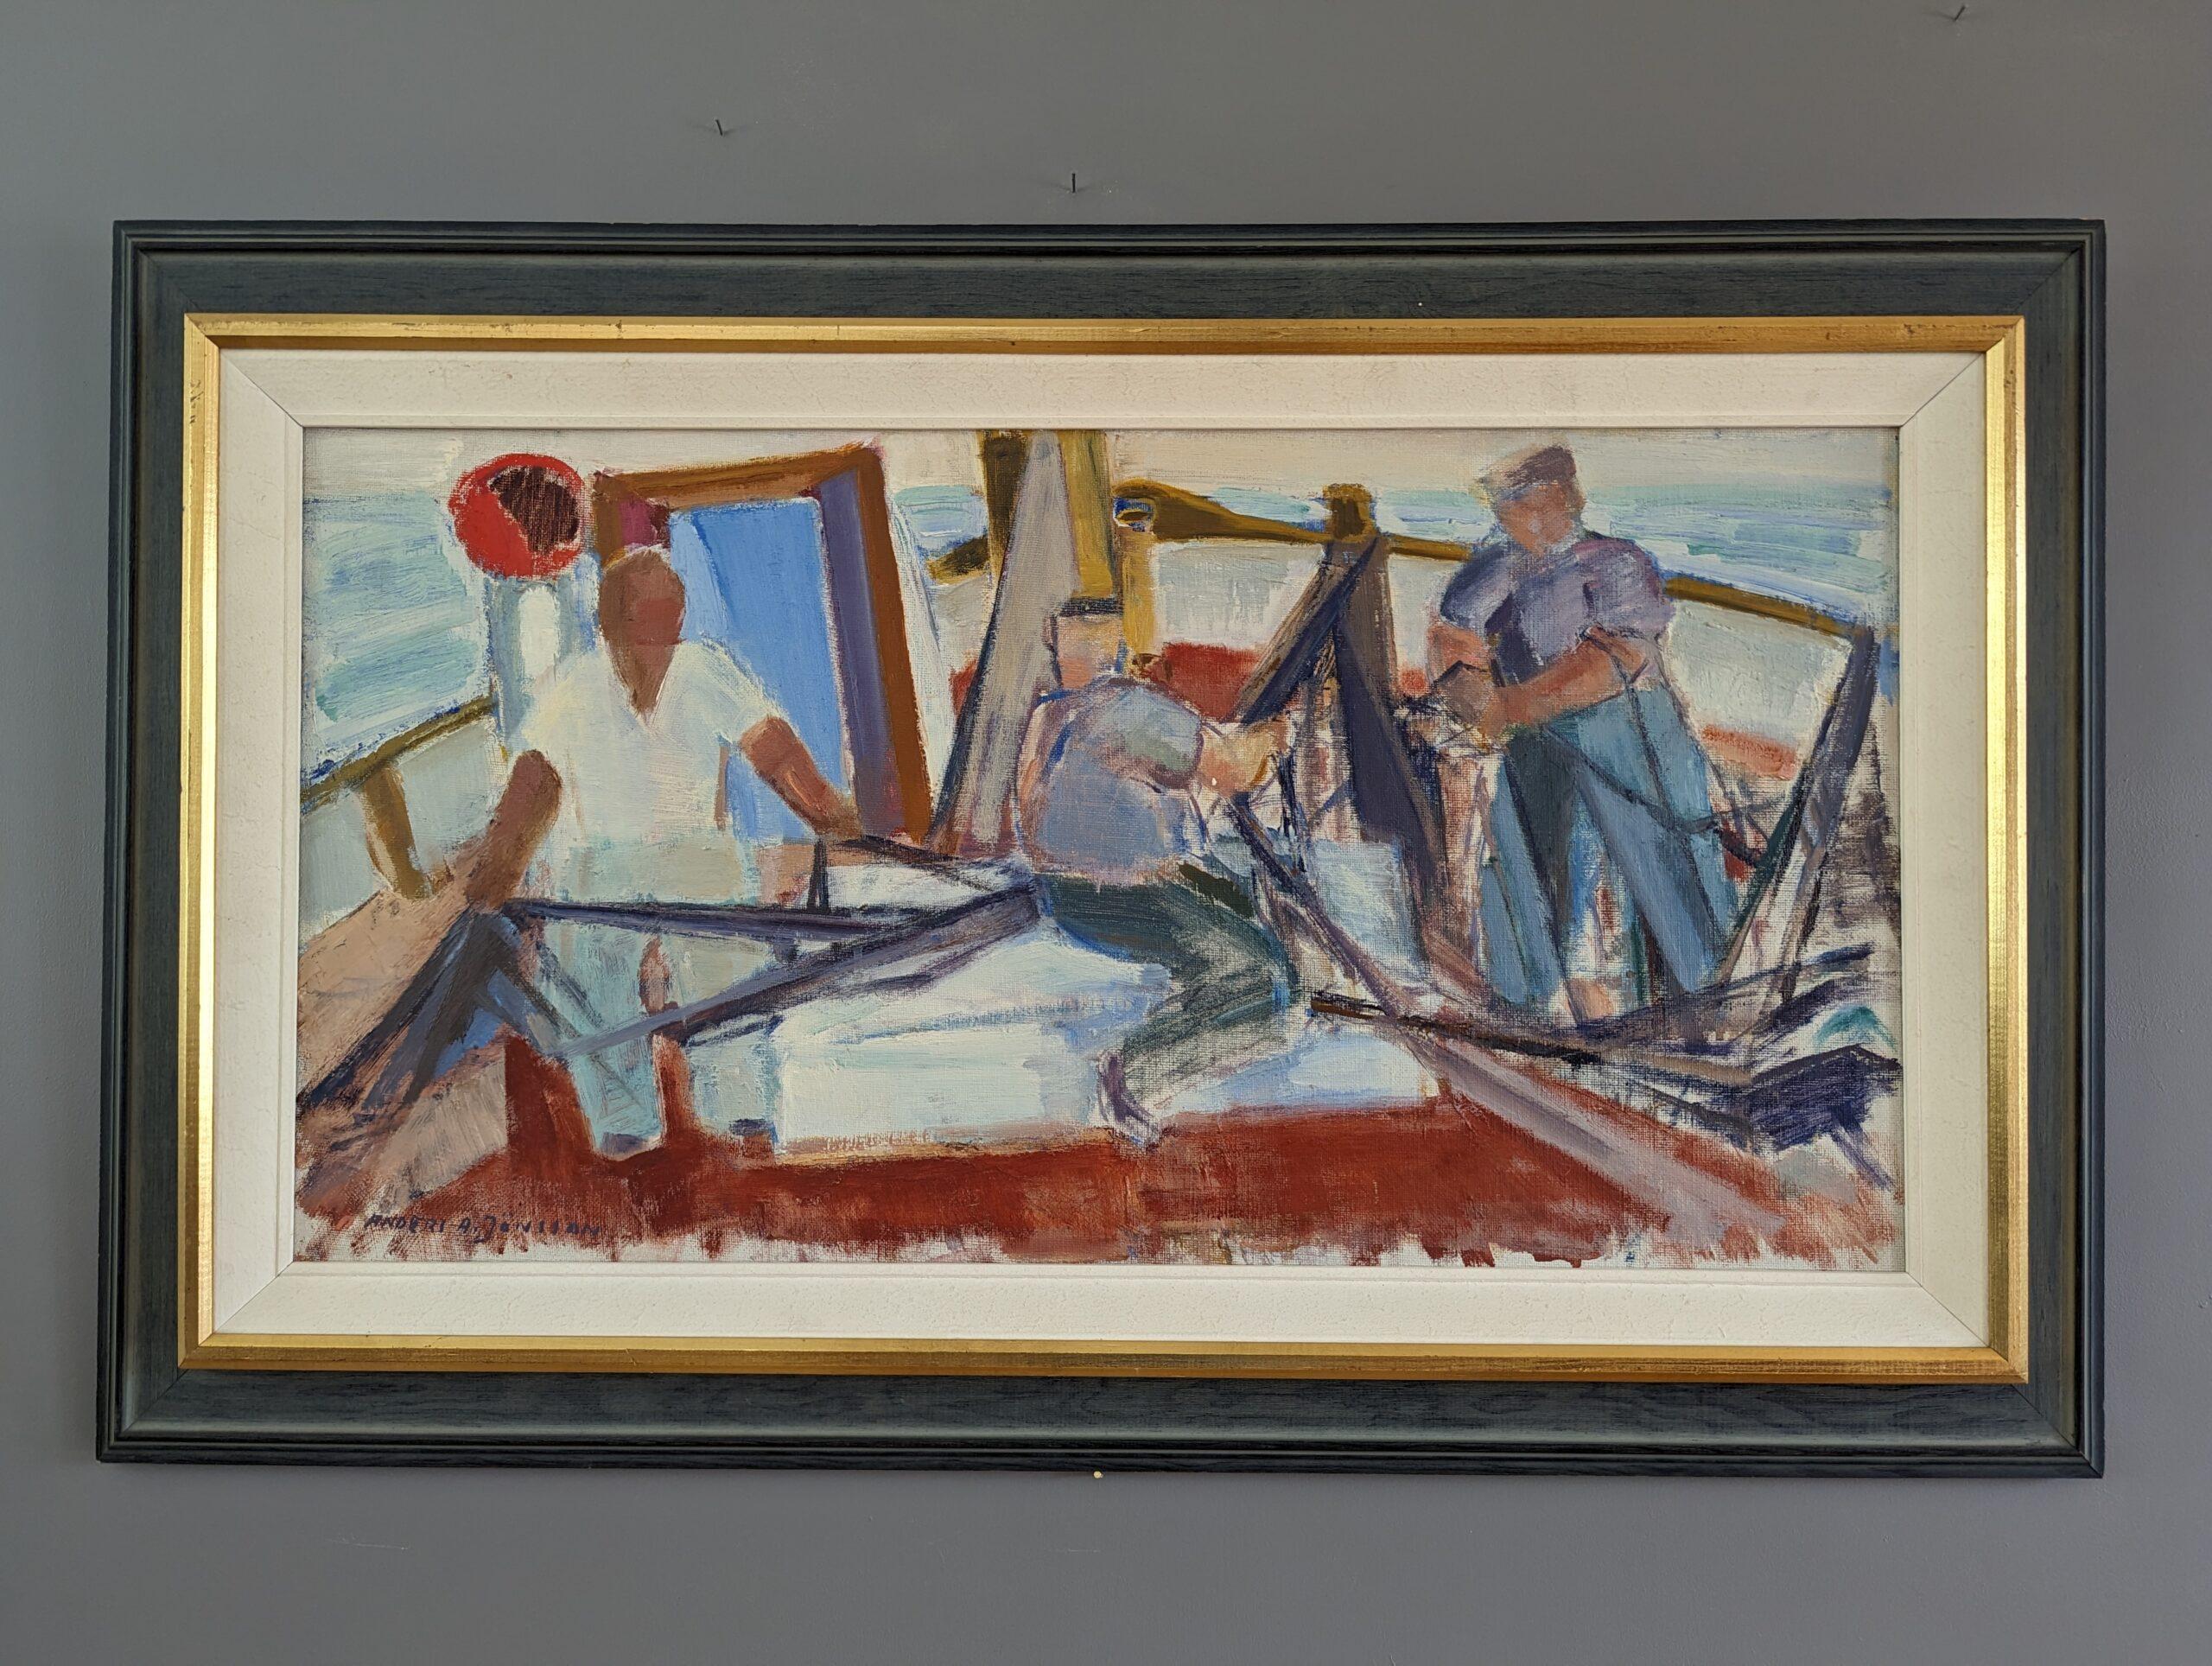 SEA CATCH
Size: 54.5 x 87 cm (including frame)
Oil on Canvas

A brilliantly executed and lively mid-century modernist composition in oil, painted onto canvas.

In this scene, we see a group of three fishermen in a boat out at sea. They appear to